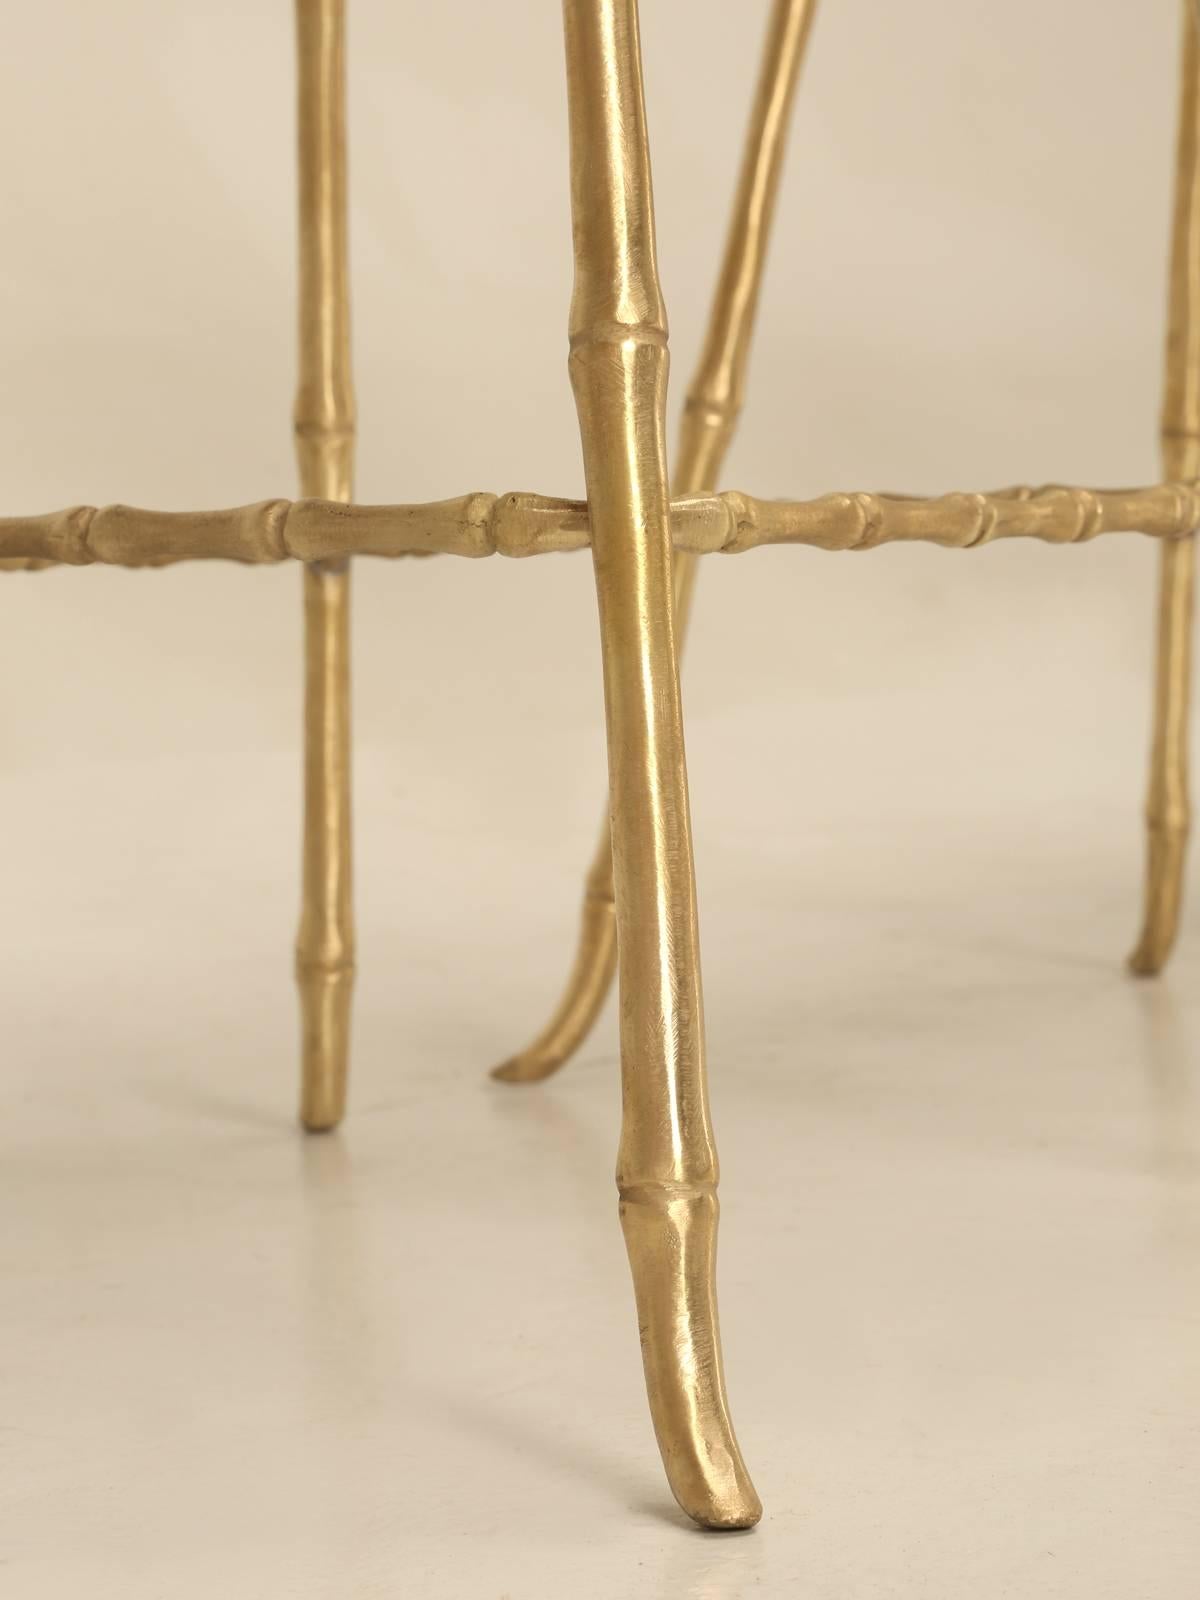 Hand-Crafted Polished Solid Brass Counter Stools in a Jansen Inspired Faux Bamboo Design